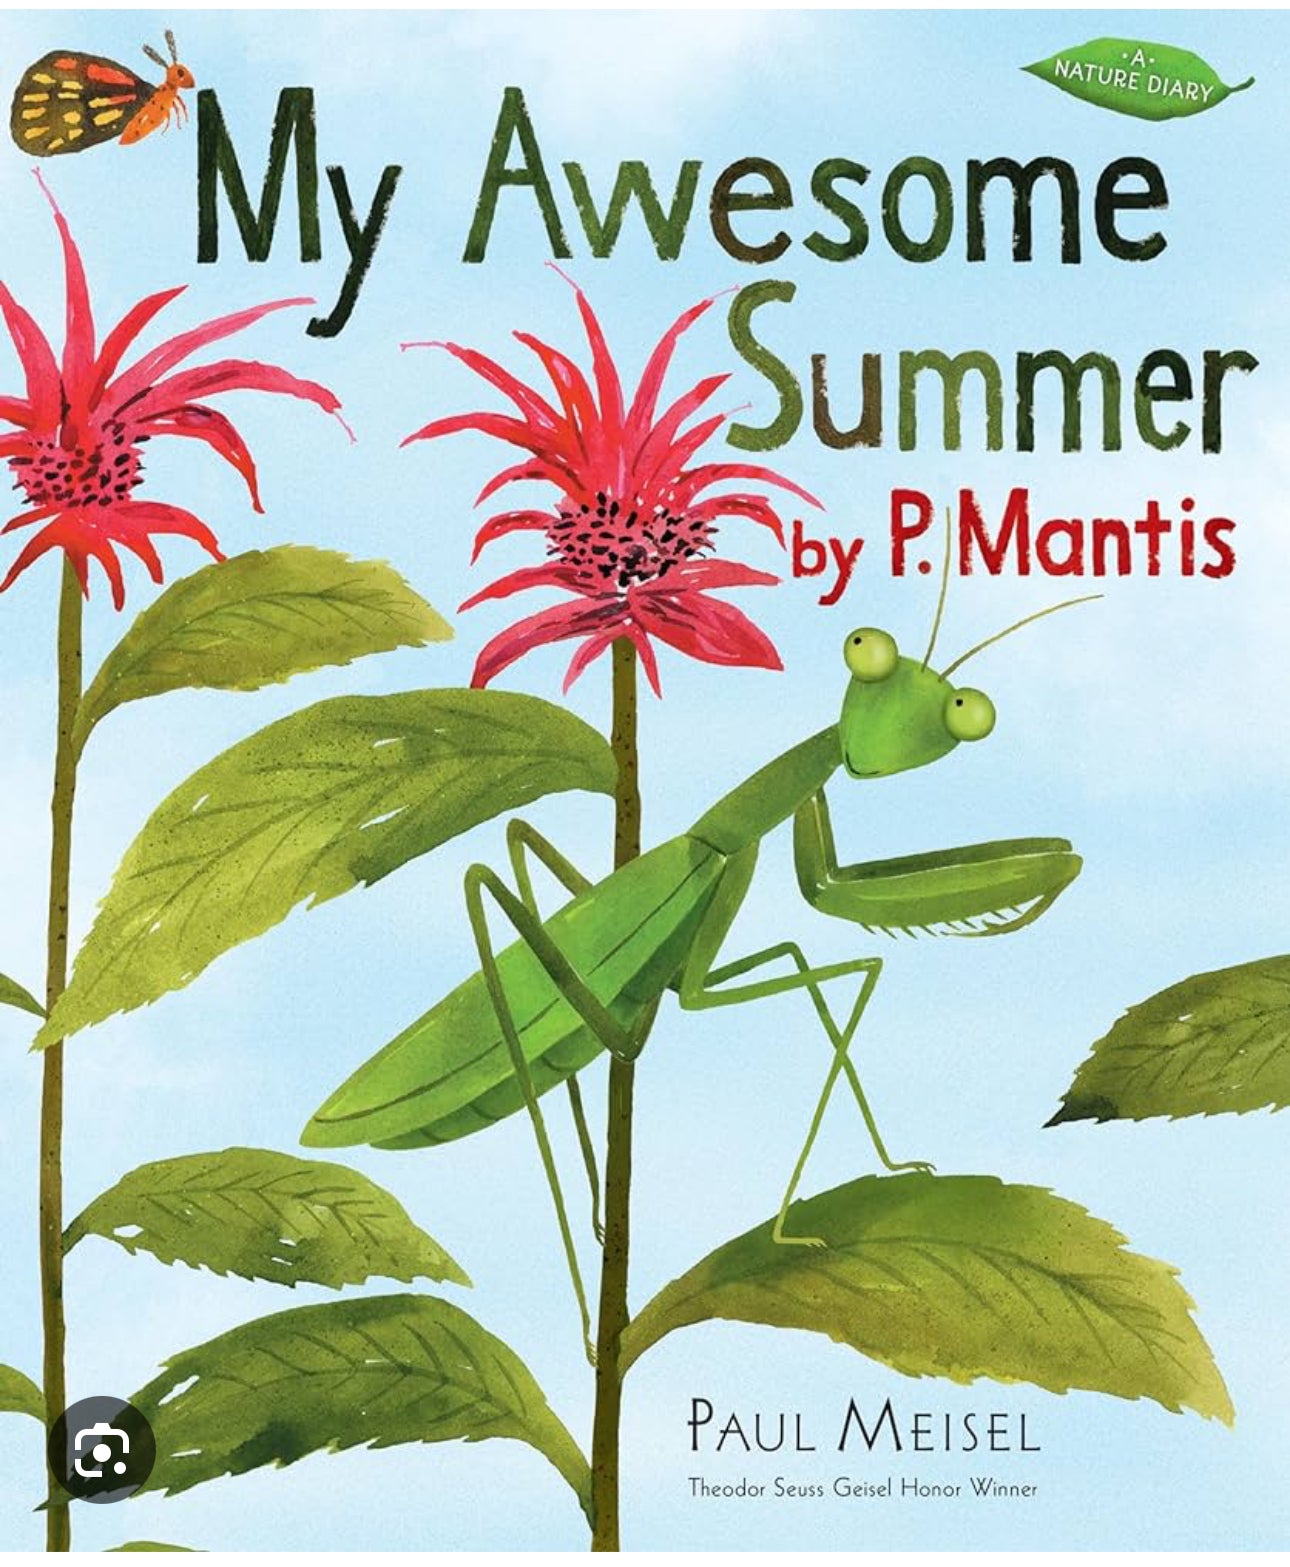 My Awesome Summer by P. Mantis Children’s book